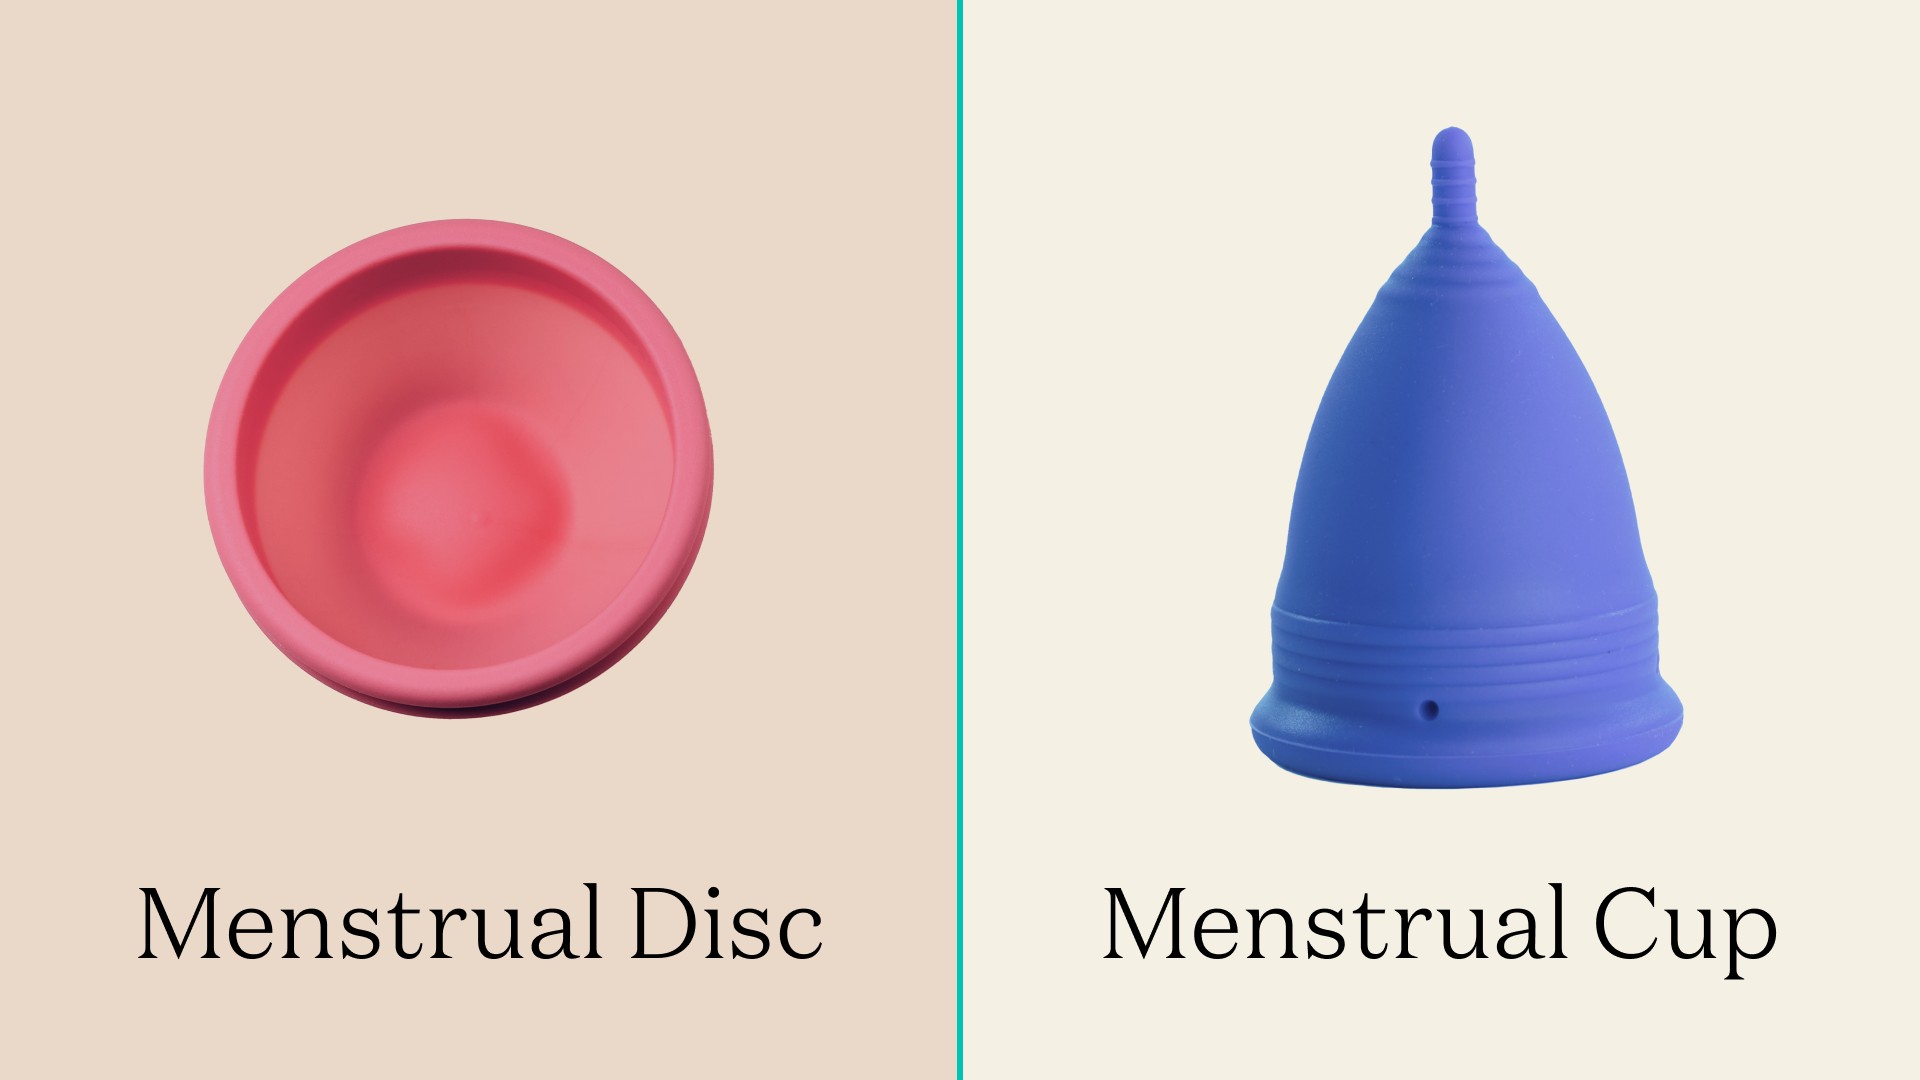 A pink menstrual disc on the left and a purple menstrual cup on the right